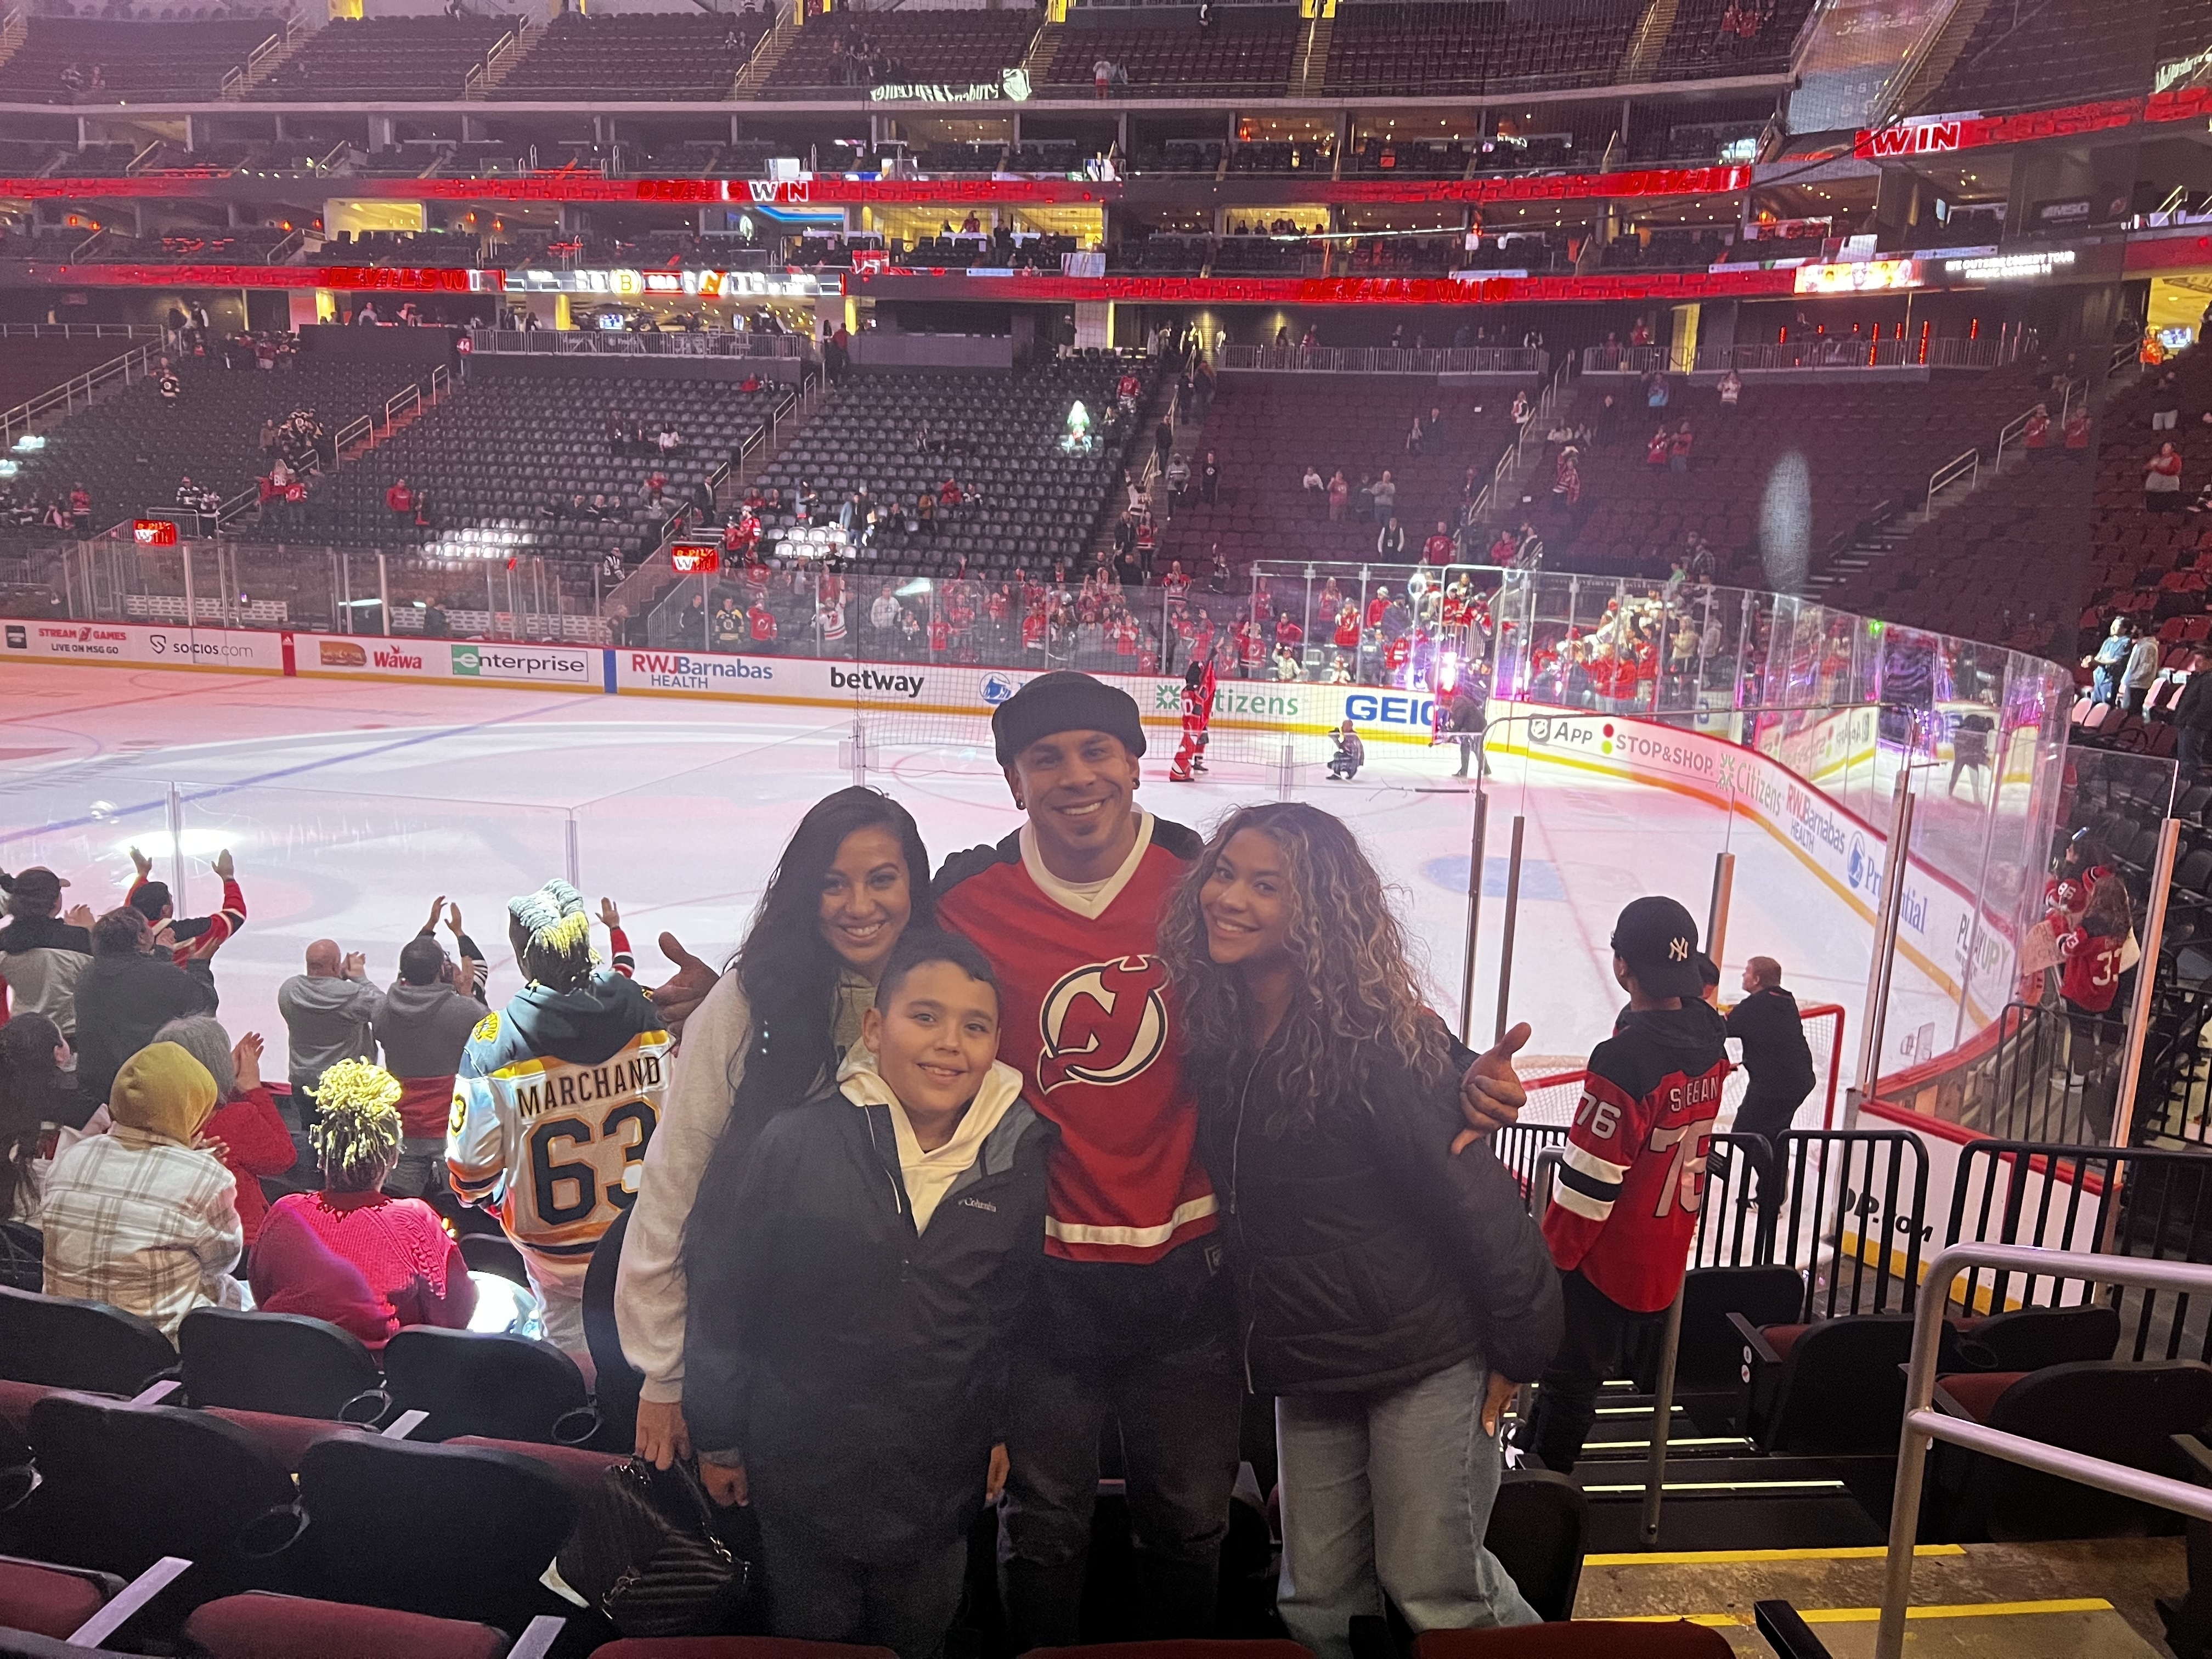 Section 4 at Prudential Center 